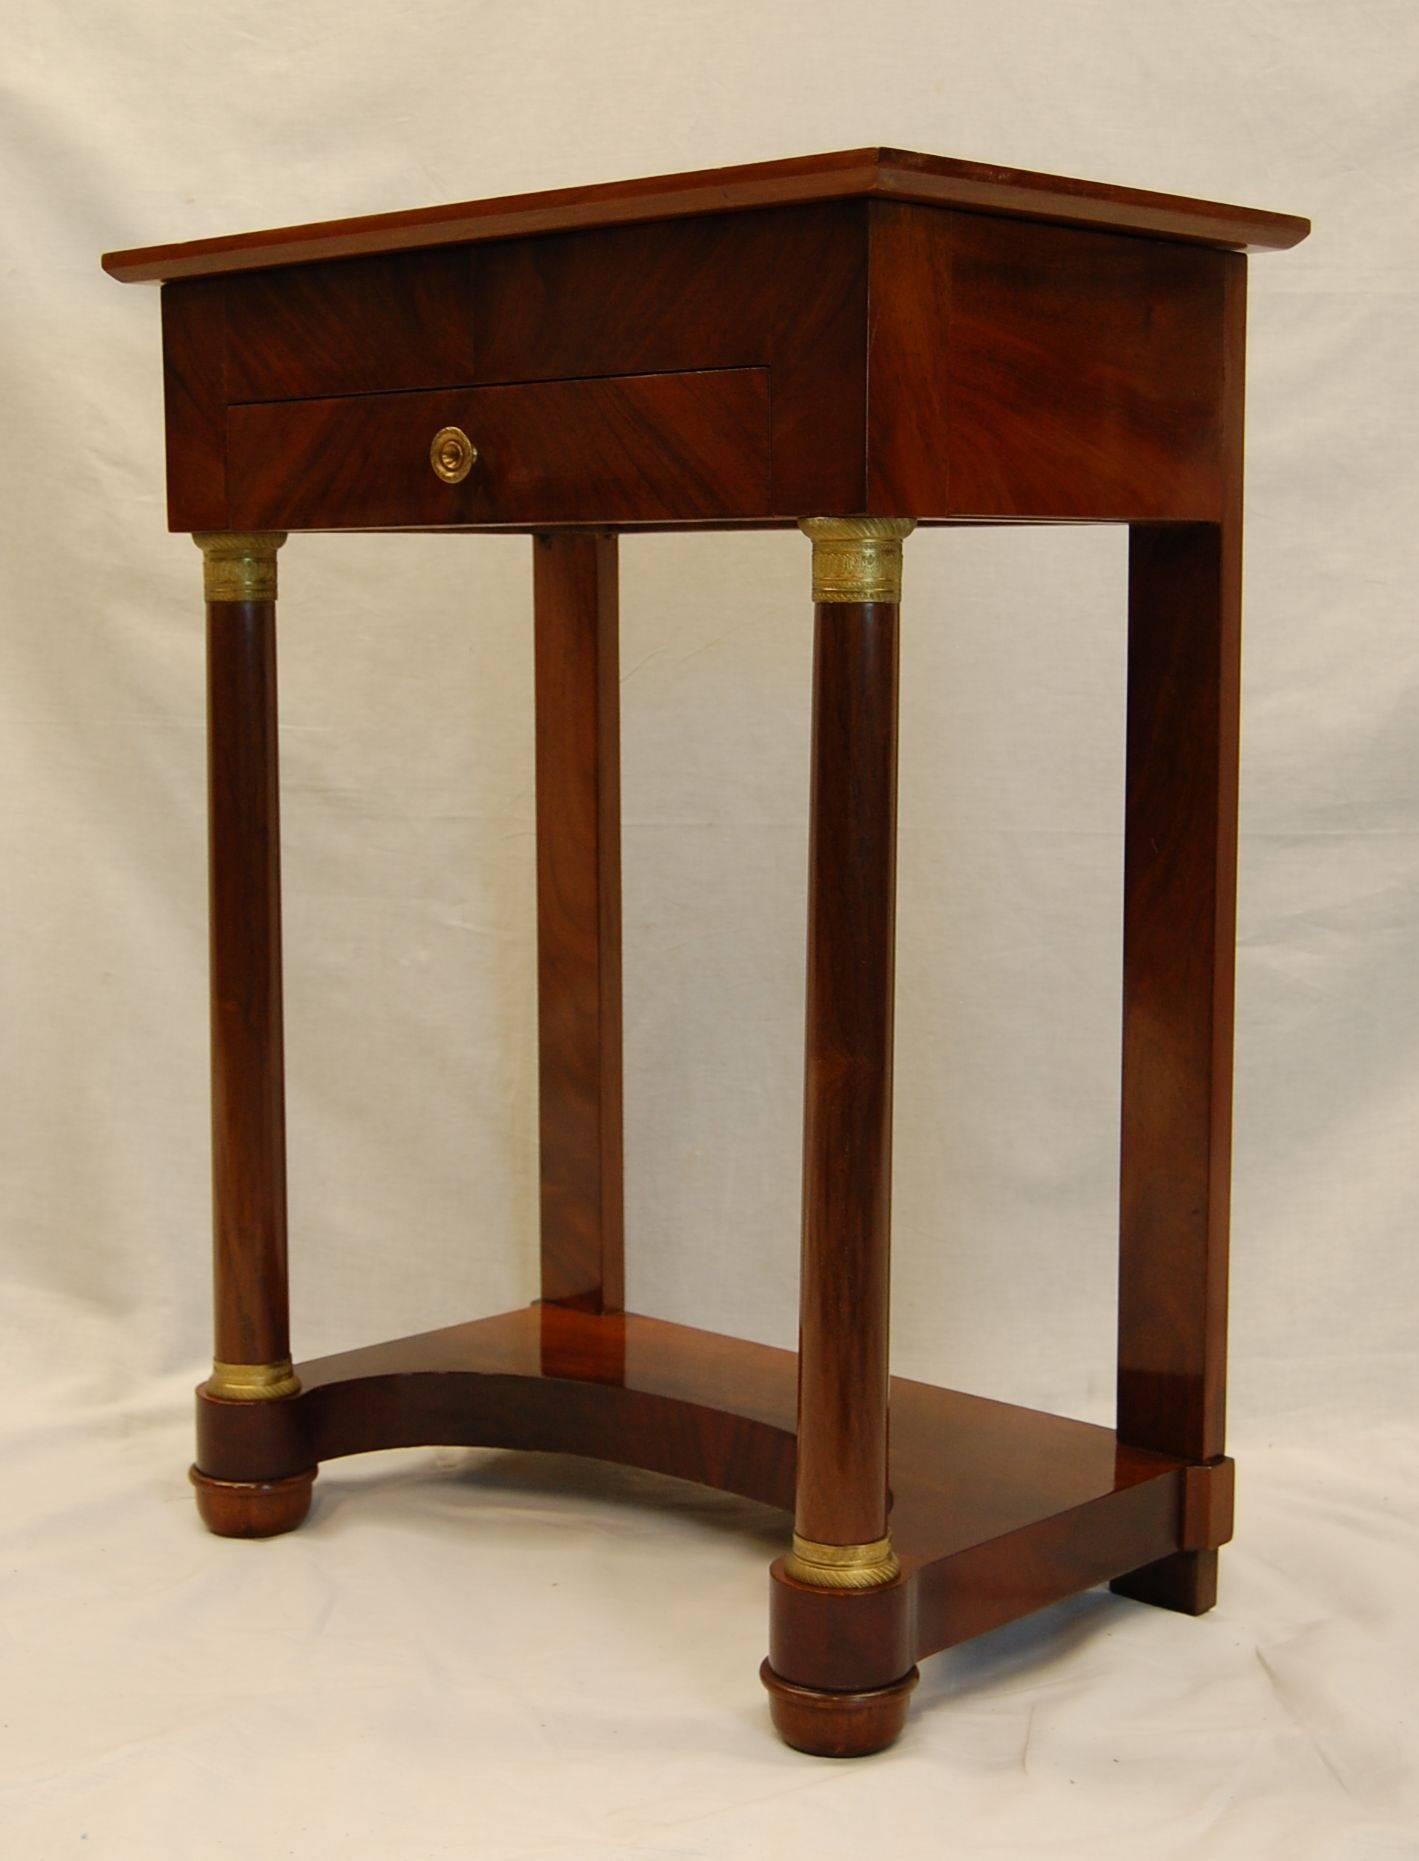 Wonderful mahogany sewing table with lift up lid and mirror underneath exposing a divided interior area.